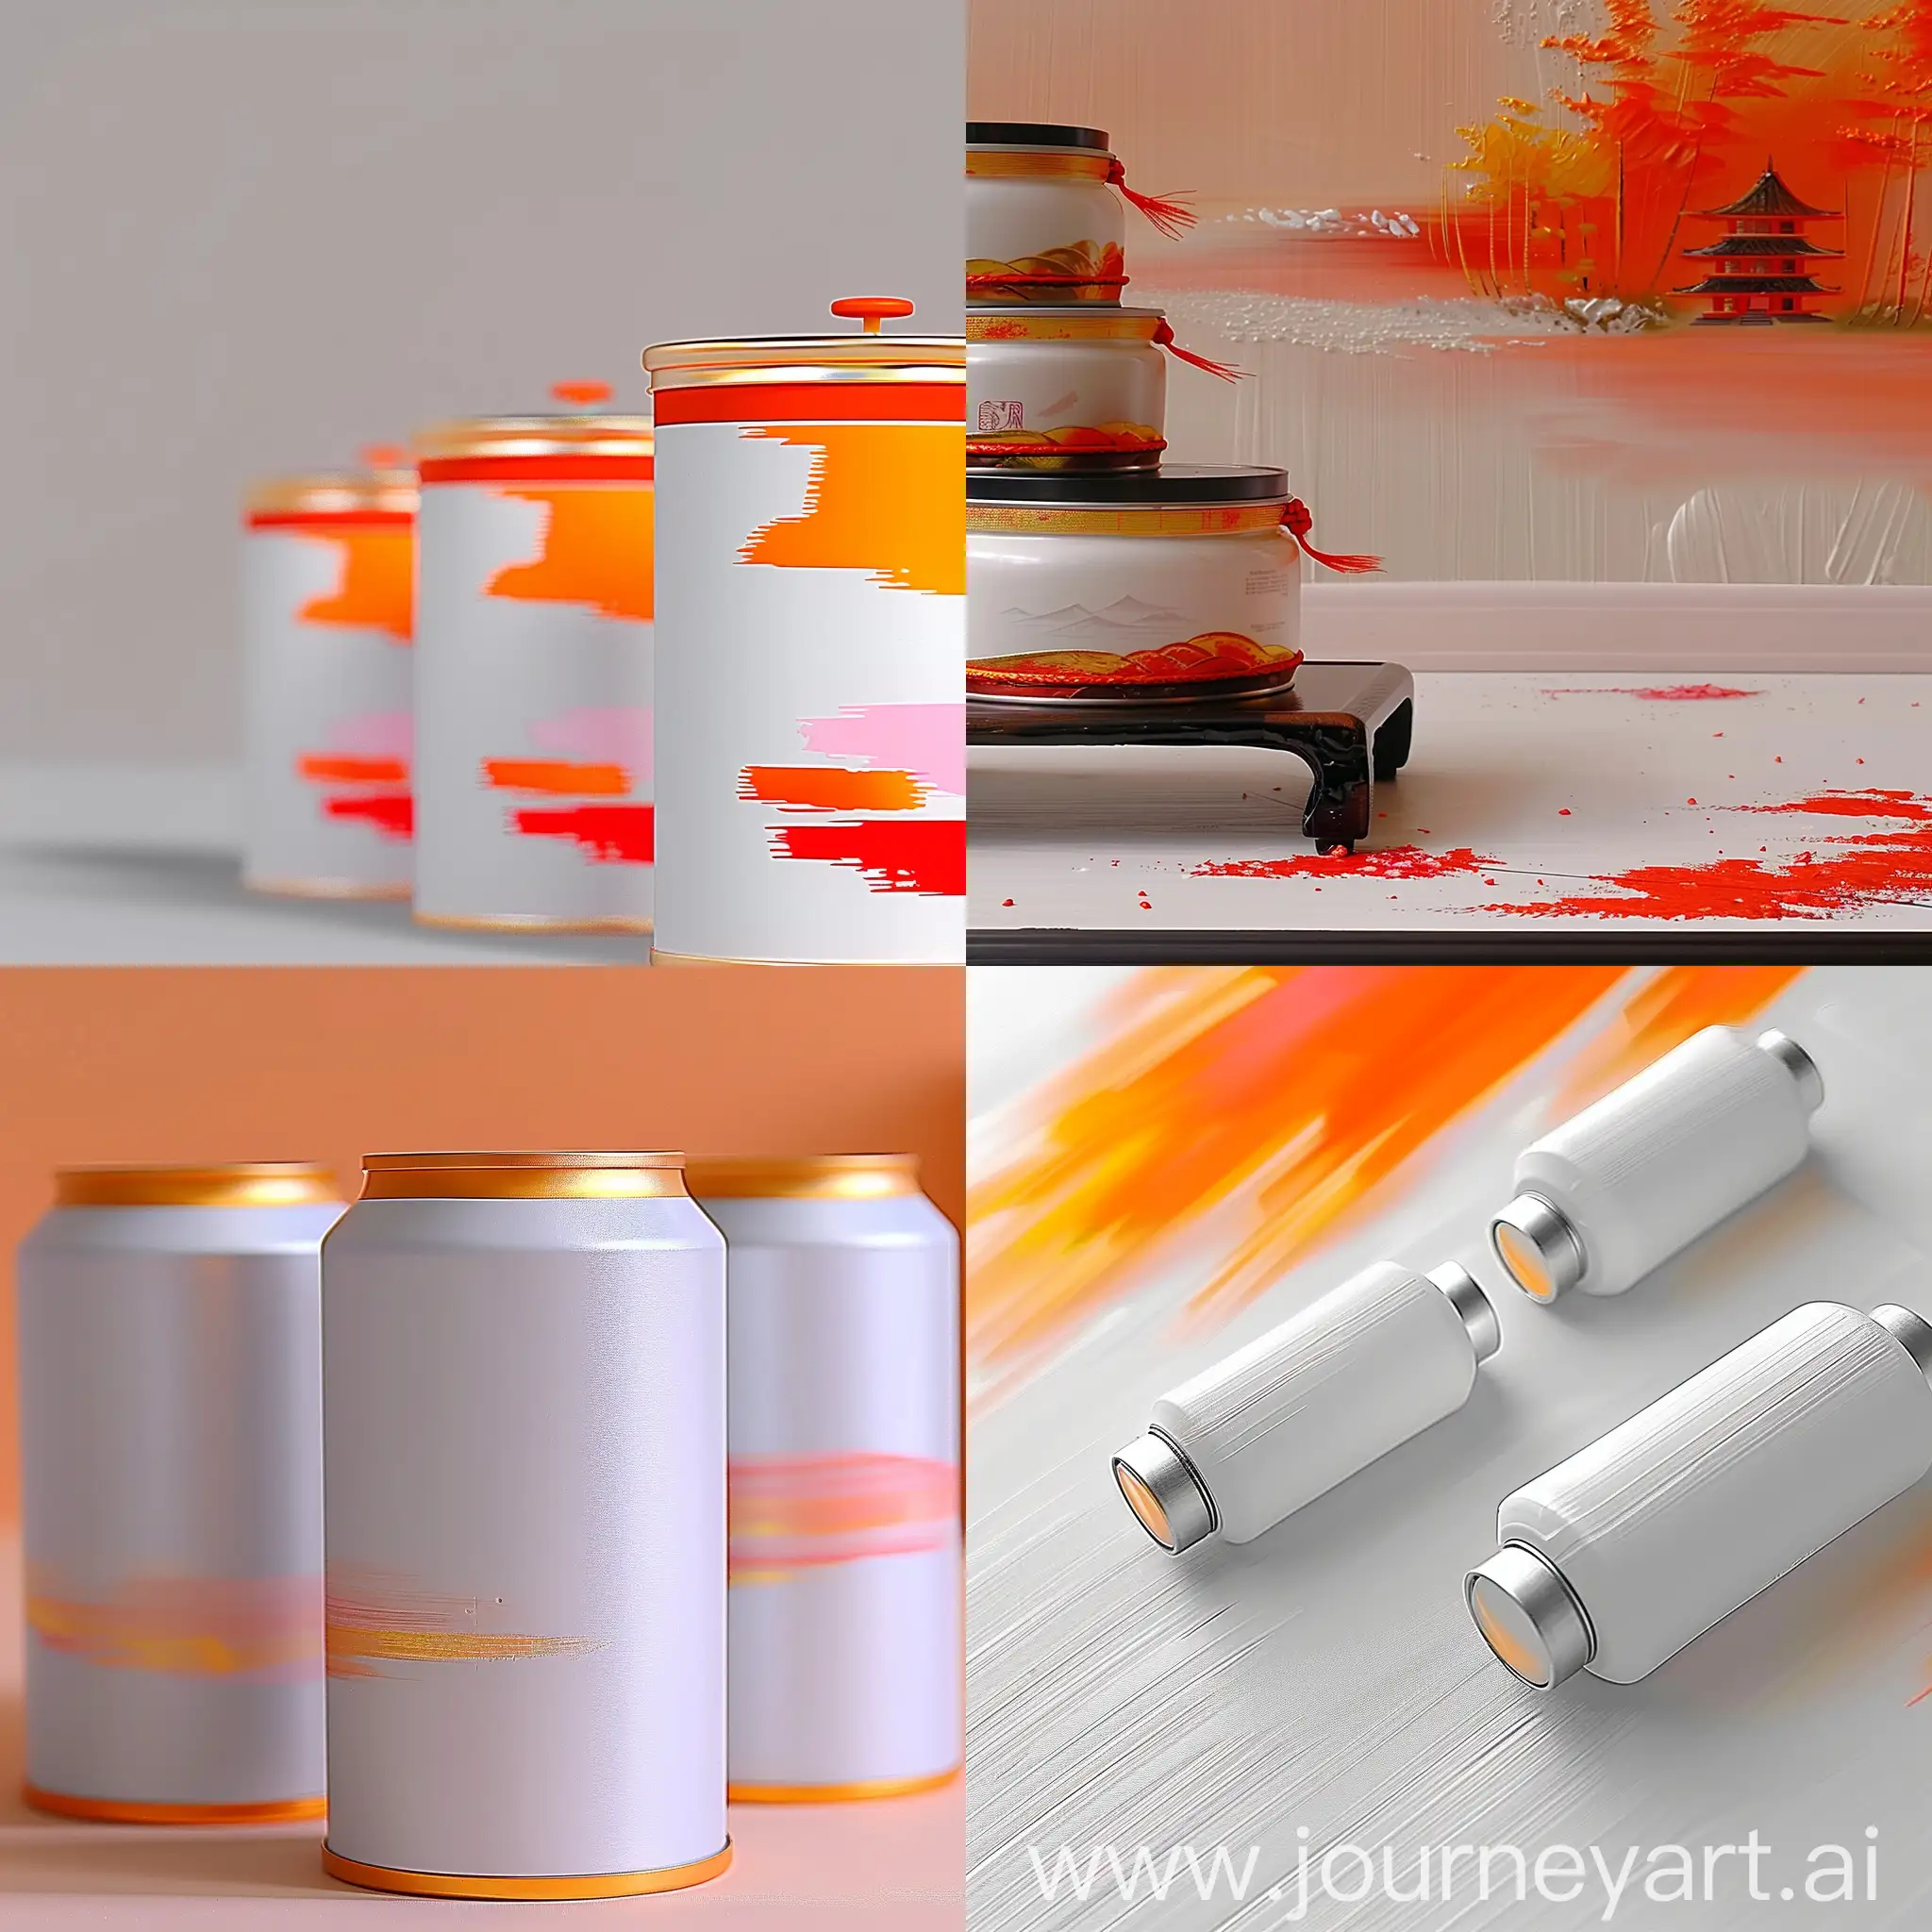 HighResolution-Product-Photography-of-Metal-Cans